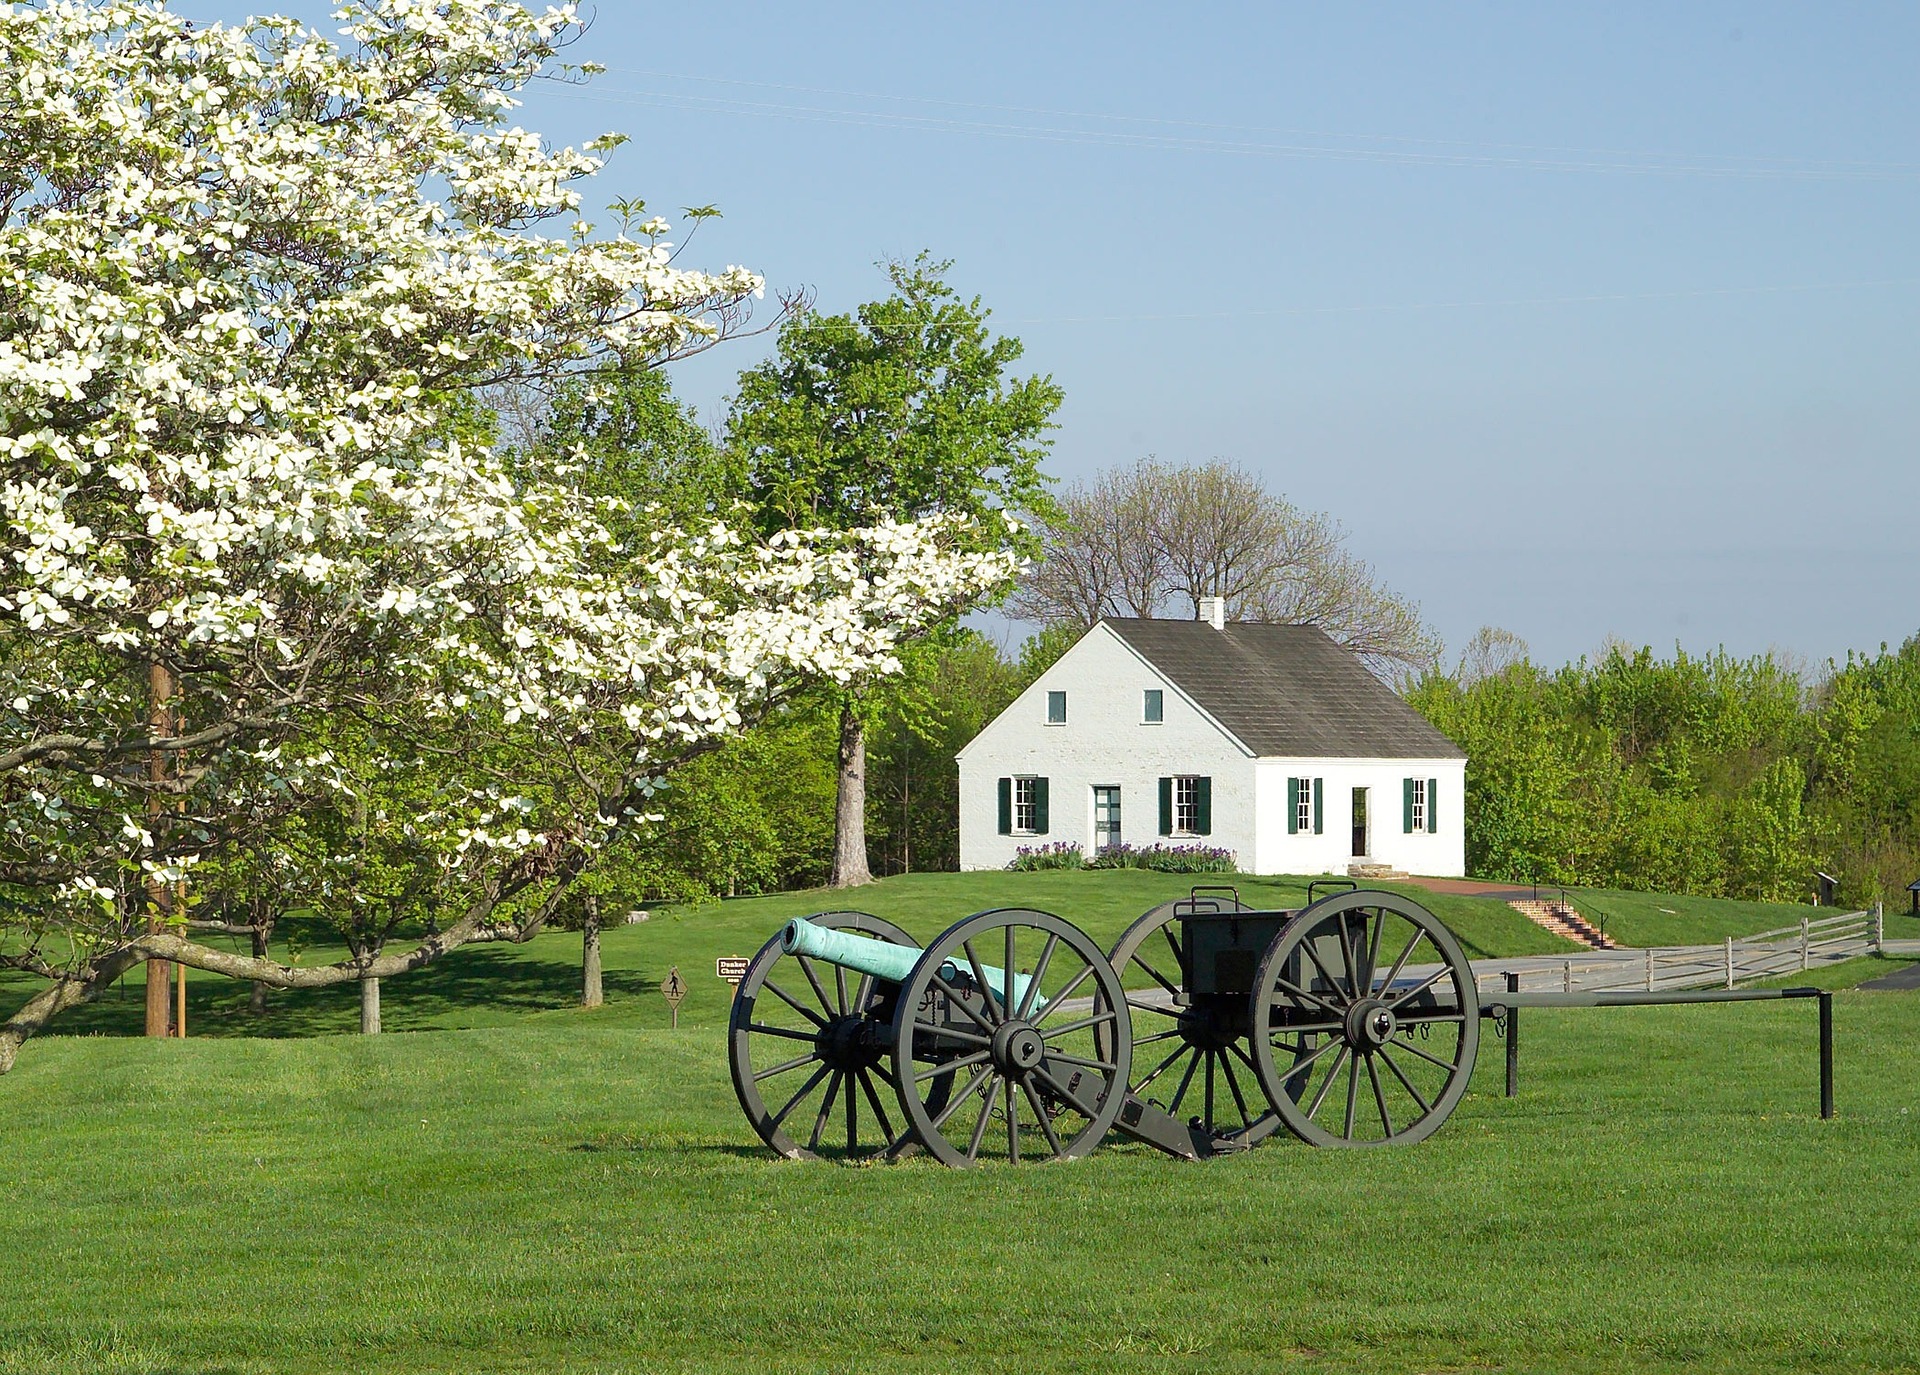 A spring day at he Dunker Church at Antietam.